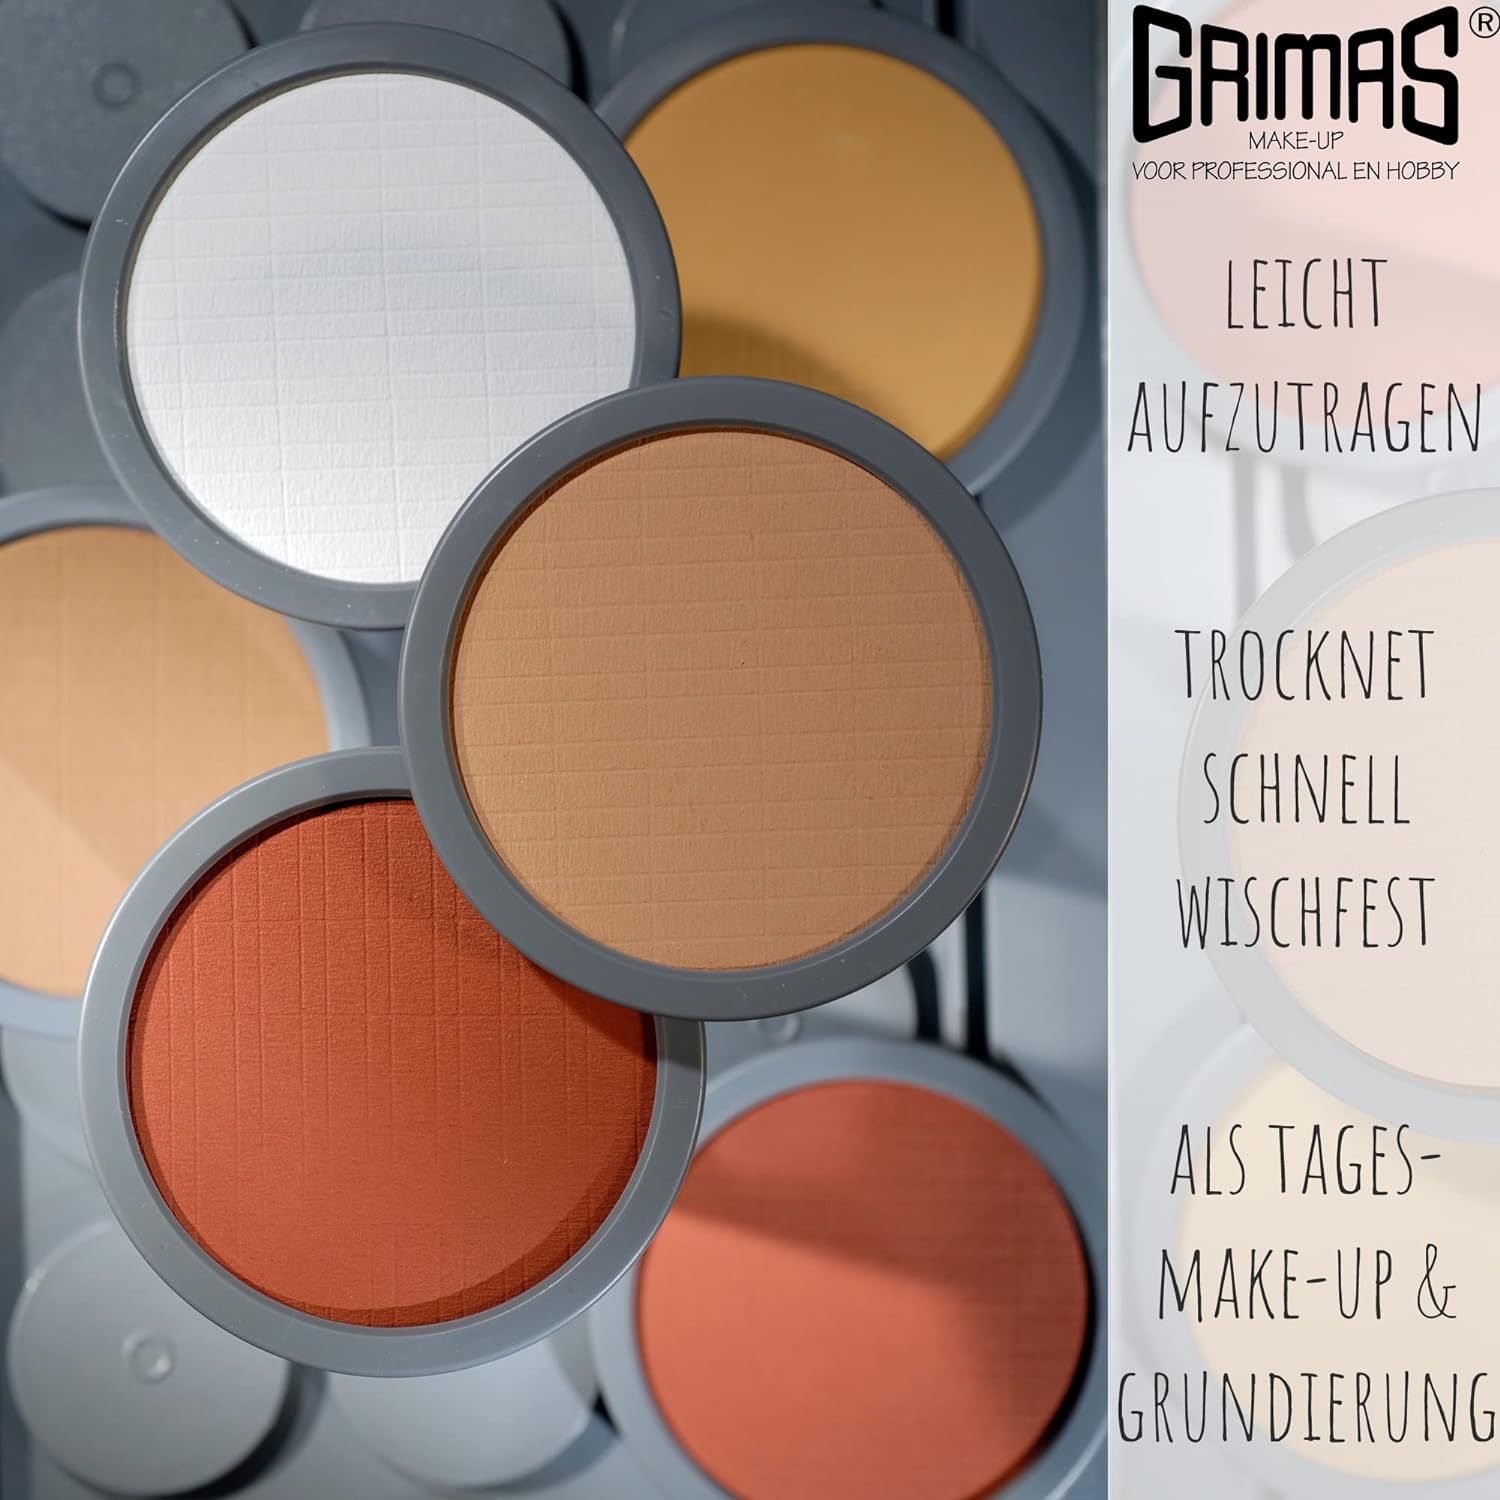 GRIMAS Cake Make Up, Skin Colour B5 Beige, 35 g, Easy to Apply, High-Quality Base Make-Up, Also Ideal for Makeup and as a Foundation, Dries Quickly Smudge-proof Water-Based